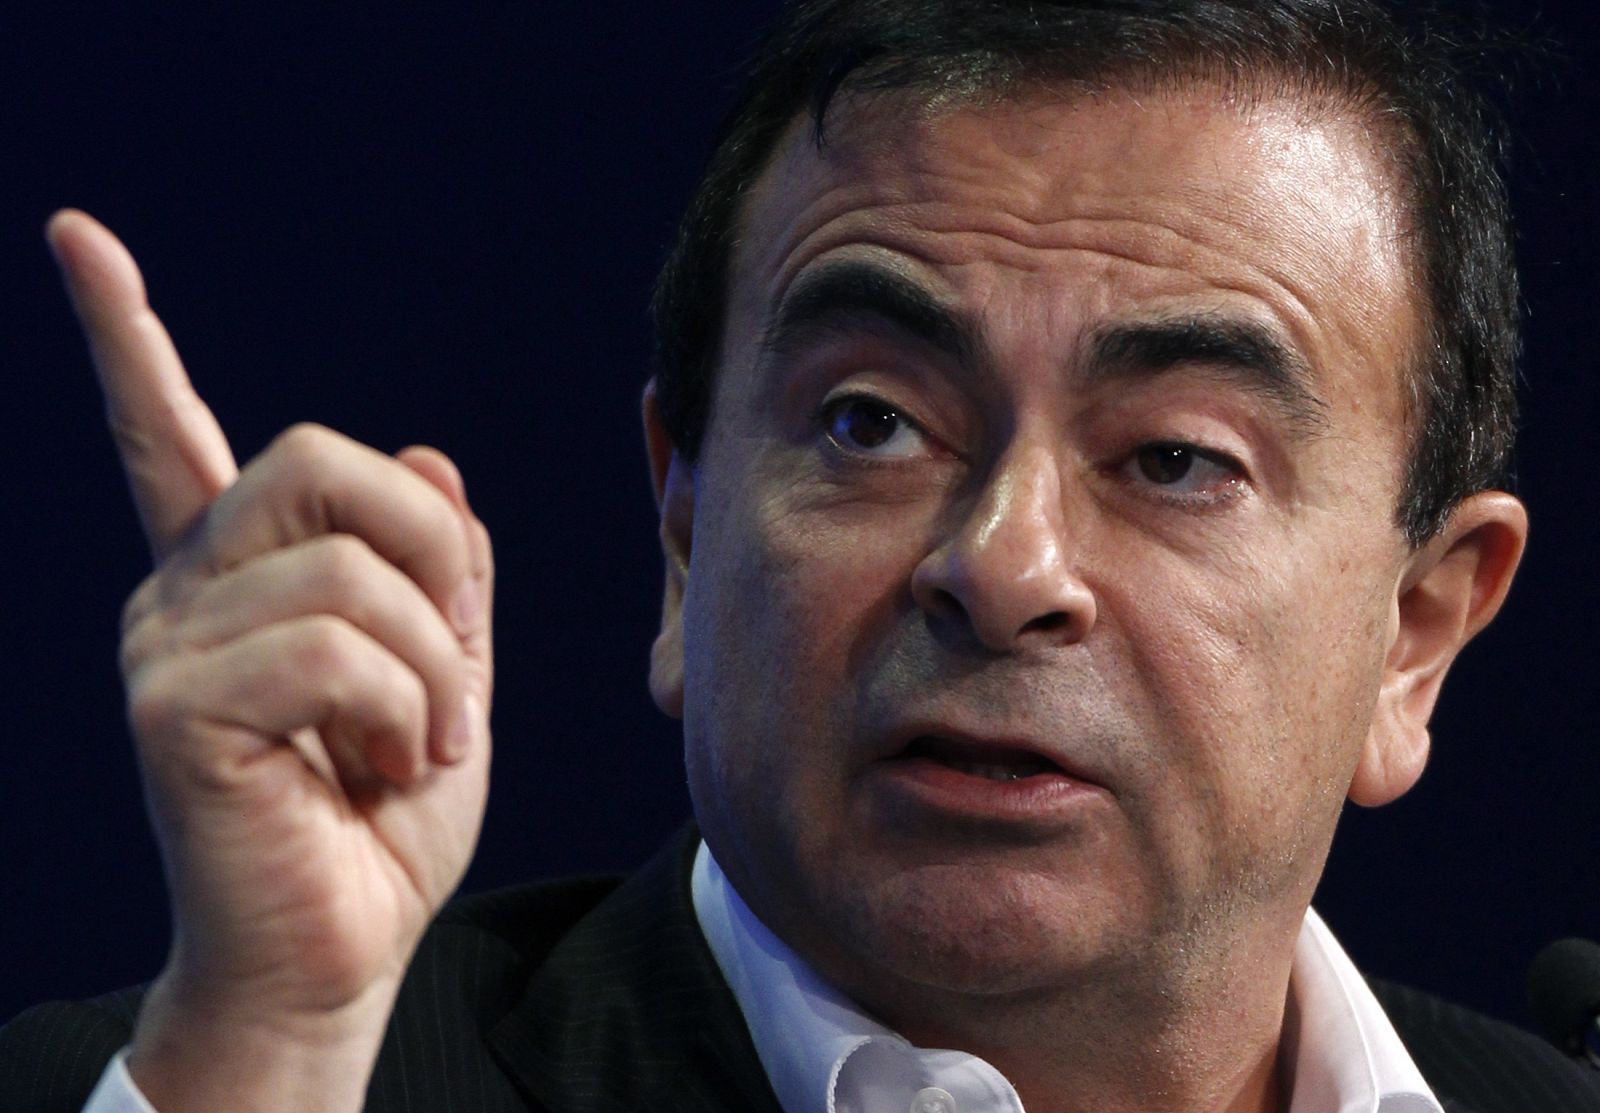 Chairman and CEO of Renault-Nissan Alliance, Ghosn speaks during a session at the World Economic Forum in Davos